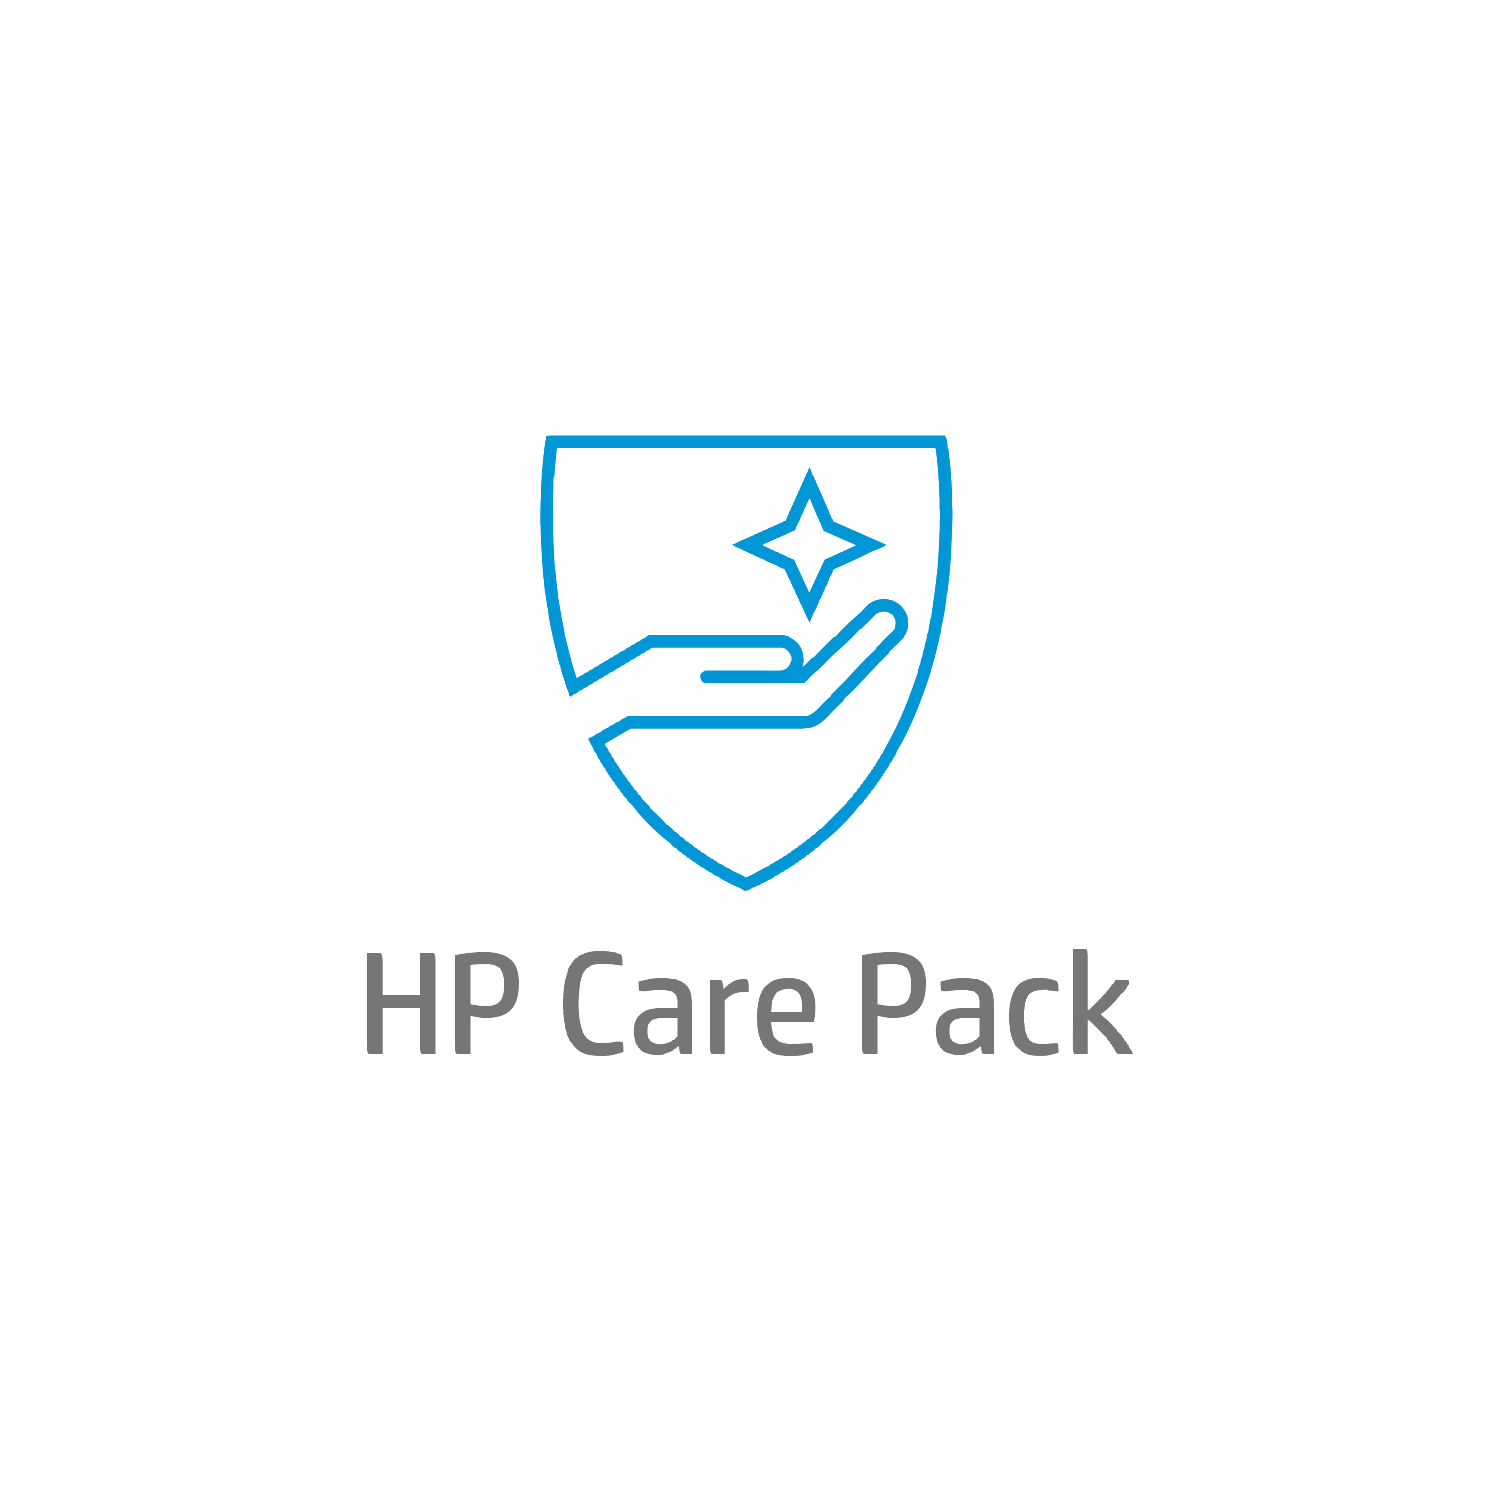 Bild von HP 3y 9x5 AC Prnt ScnProBdl 10,000+ Lic SW Support REQUIRED for each sofware license purchased. - Remote software assistance - Remote - In warranty - Standard workdays - 9 hours - 3 years - Next available agent